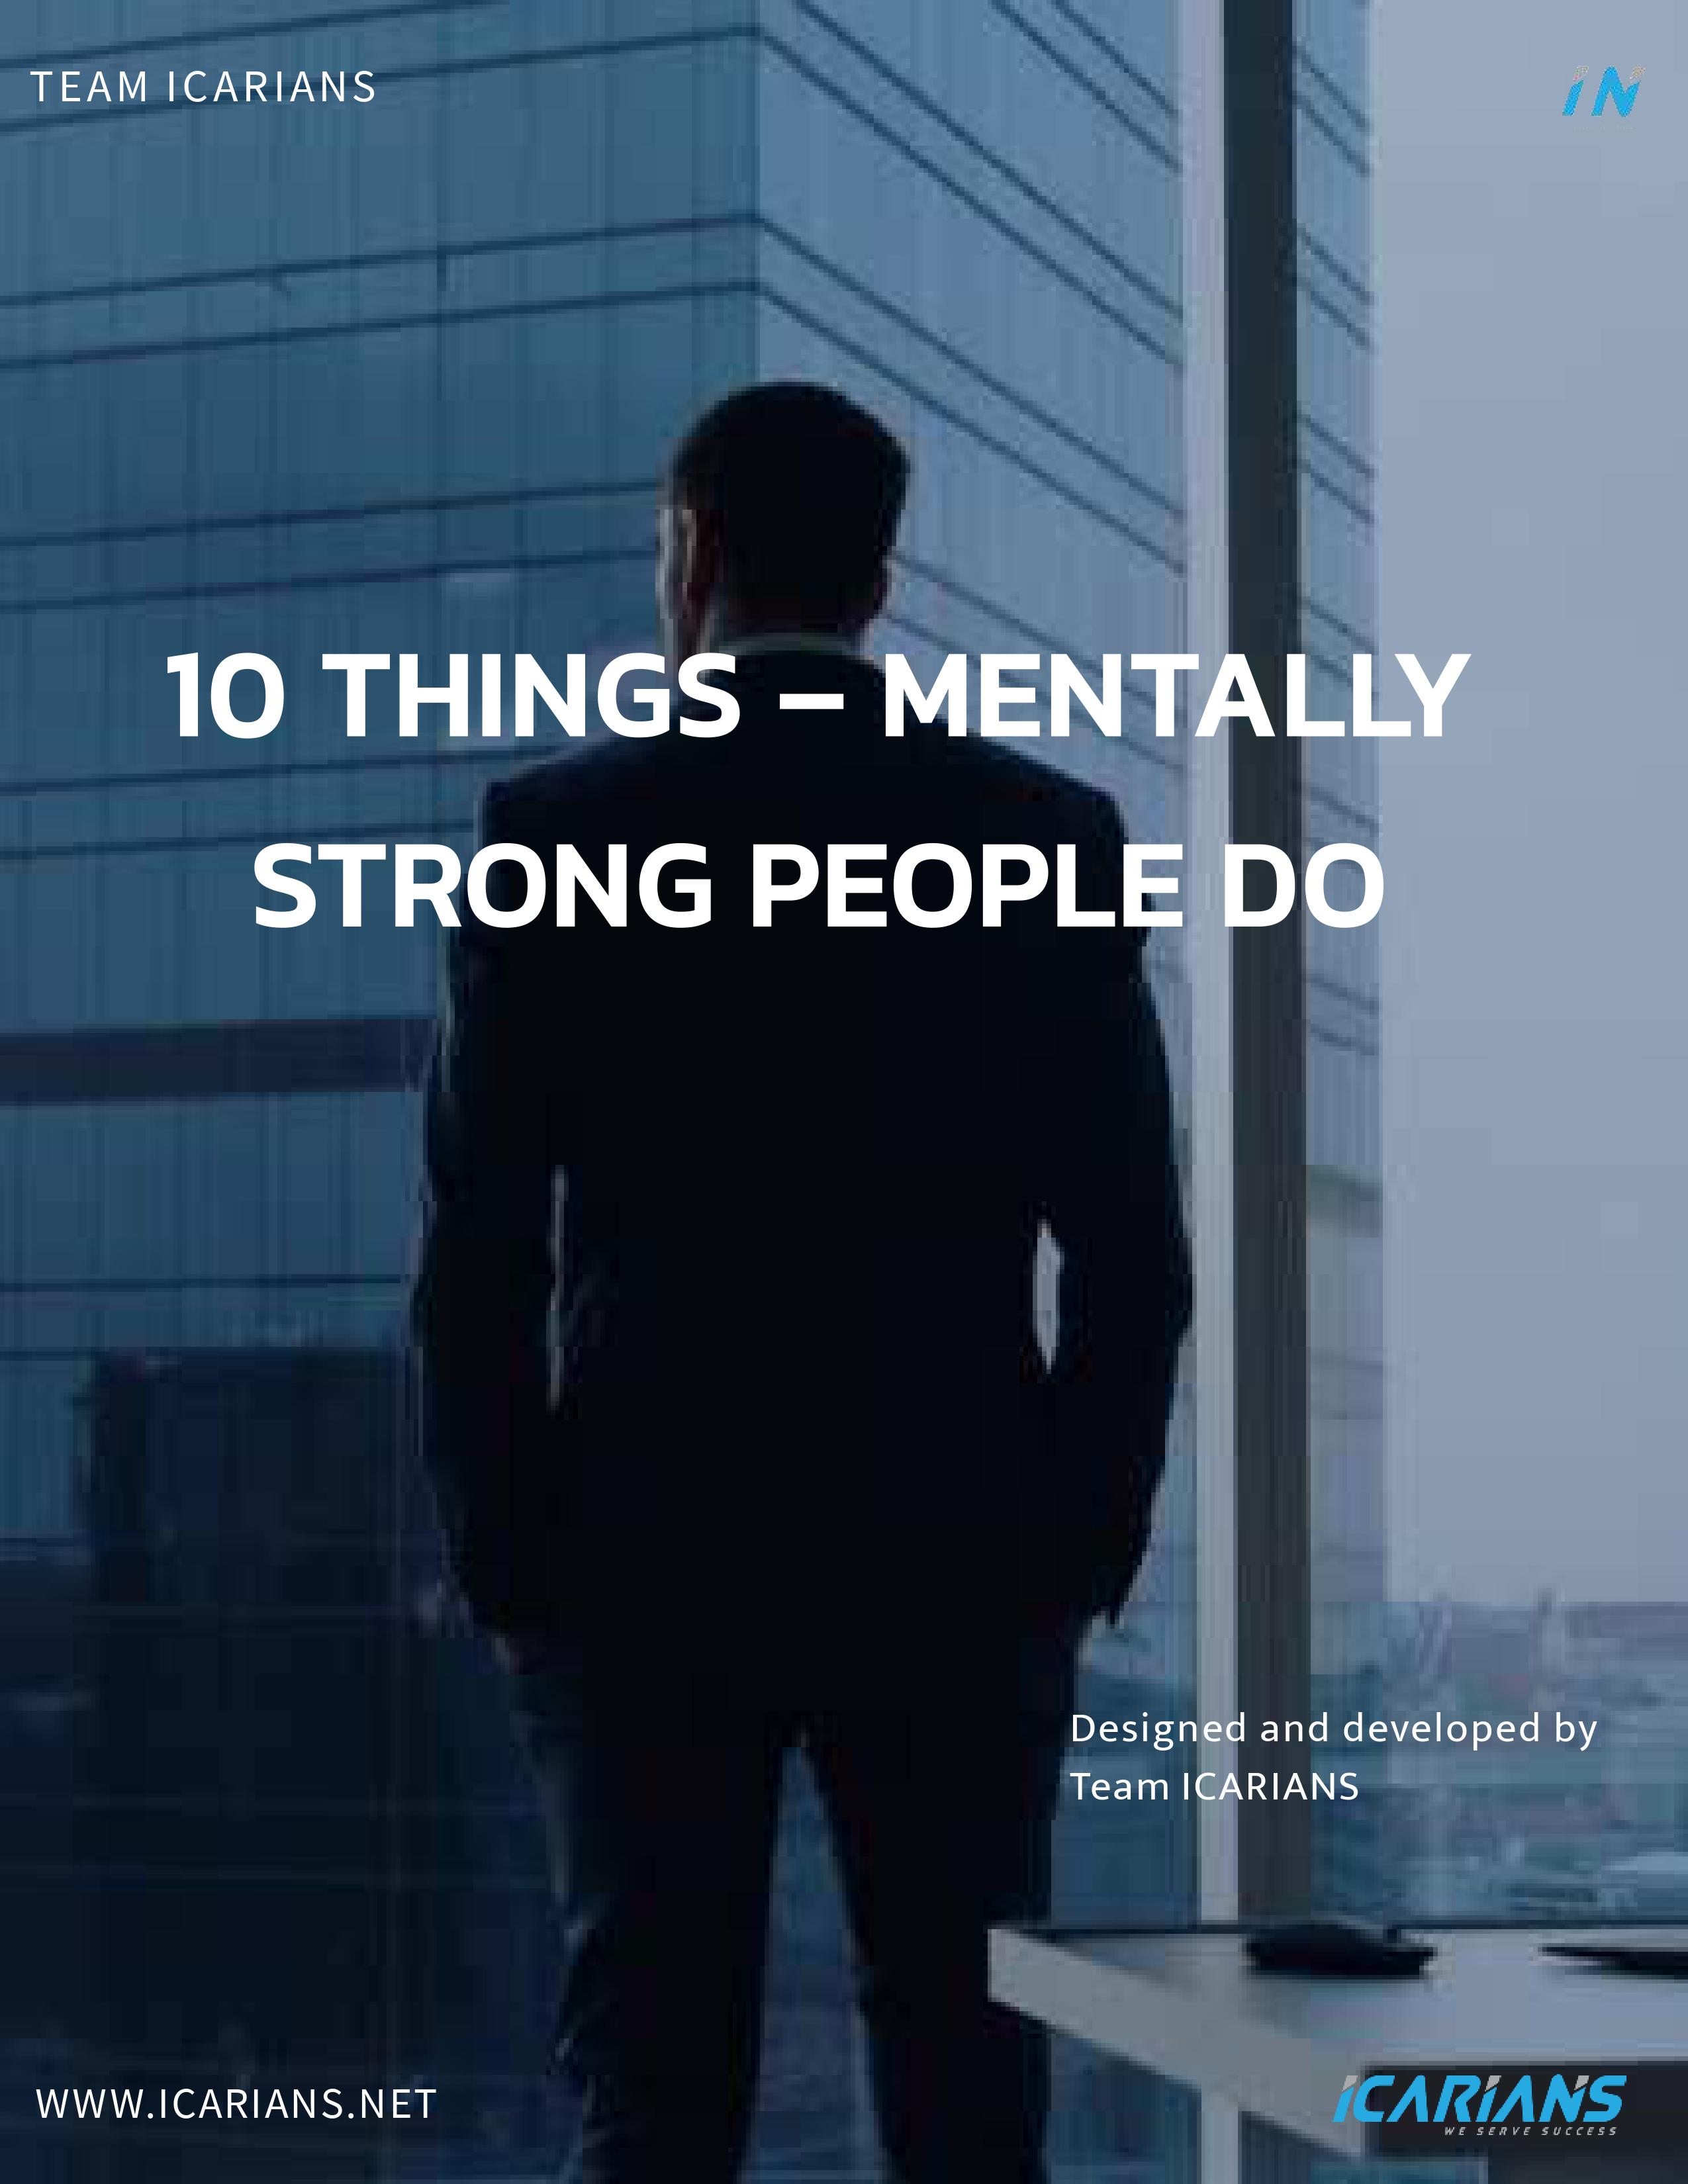 10 Things - Mentally Strong People do